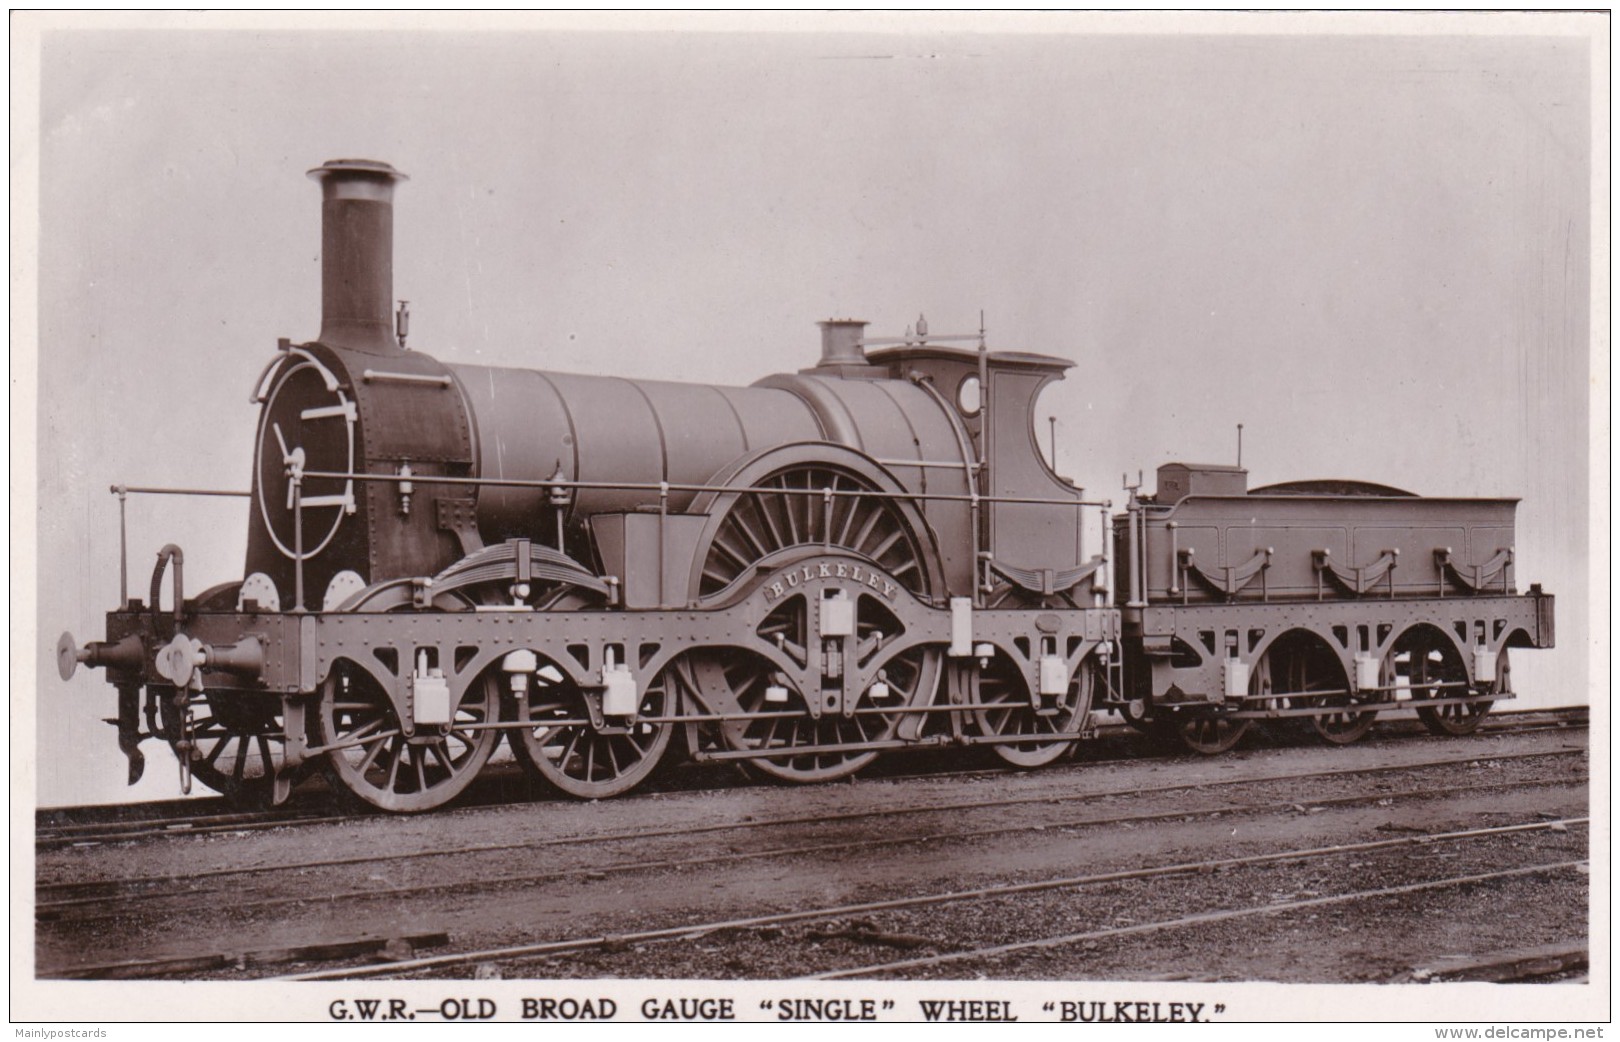 Period photo of the "Bulkeley" broad gauge locomotive which was in service from 1880-1892. This locomotive worked the last ever broad gauge passenger trains on Friday, 20th May and Saturday 21st May 1892. (Picture courtesy delcampe-static.net).